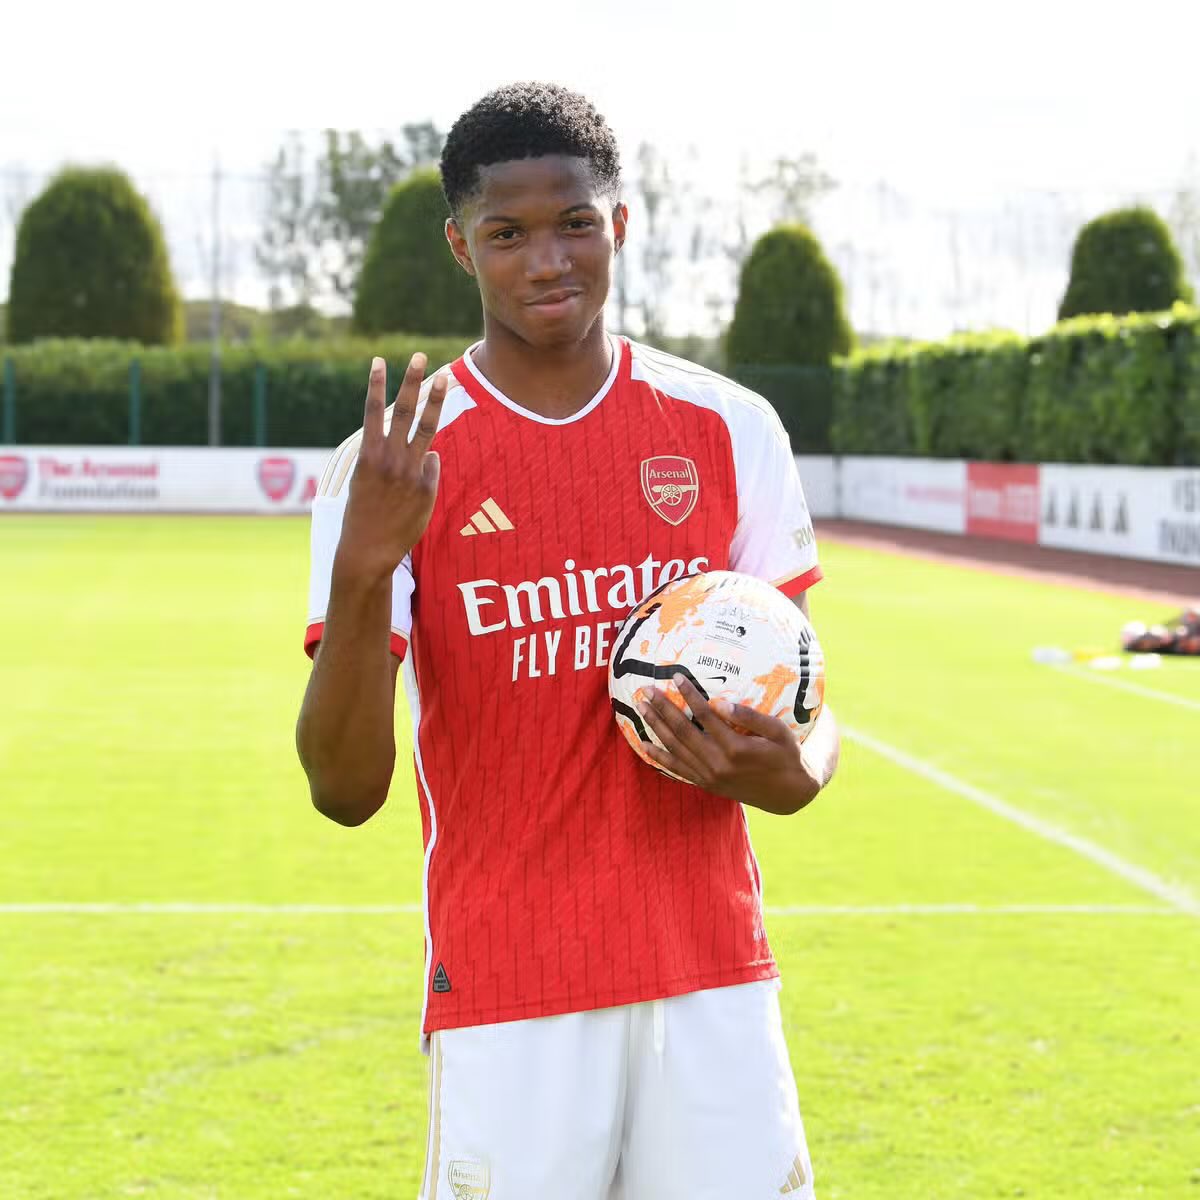 Chido Obi-Martin (16) in his last seven matches for Arsenal U18s: ⚽️⚽️⚽️⚽️ vs. Crystal Palace ⚽️⚽️⚽️⚽️ vs. Fulham ⚽️ vs. West Brom ⚽️⚽️ vs. Brighton ⚽️⚽️⚽️⚽️⚽️ vs. West Ham ⚽️ vs. Aston Villa ⚽️⚽️⚽️⚽️⚽️⚽️⚽️ vs. Norwich City Remember the name. 💎